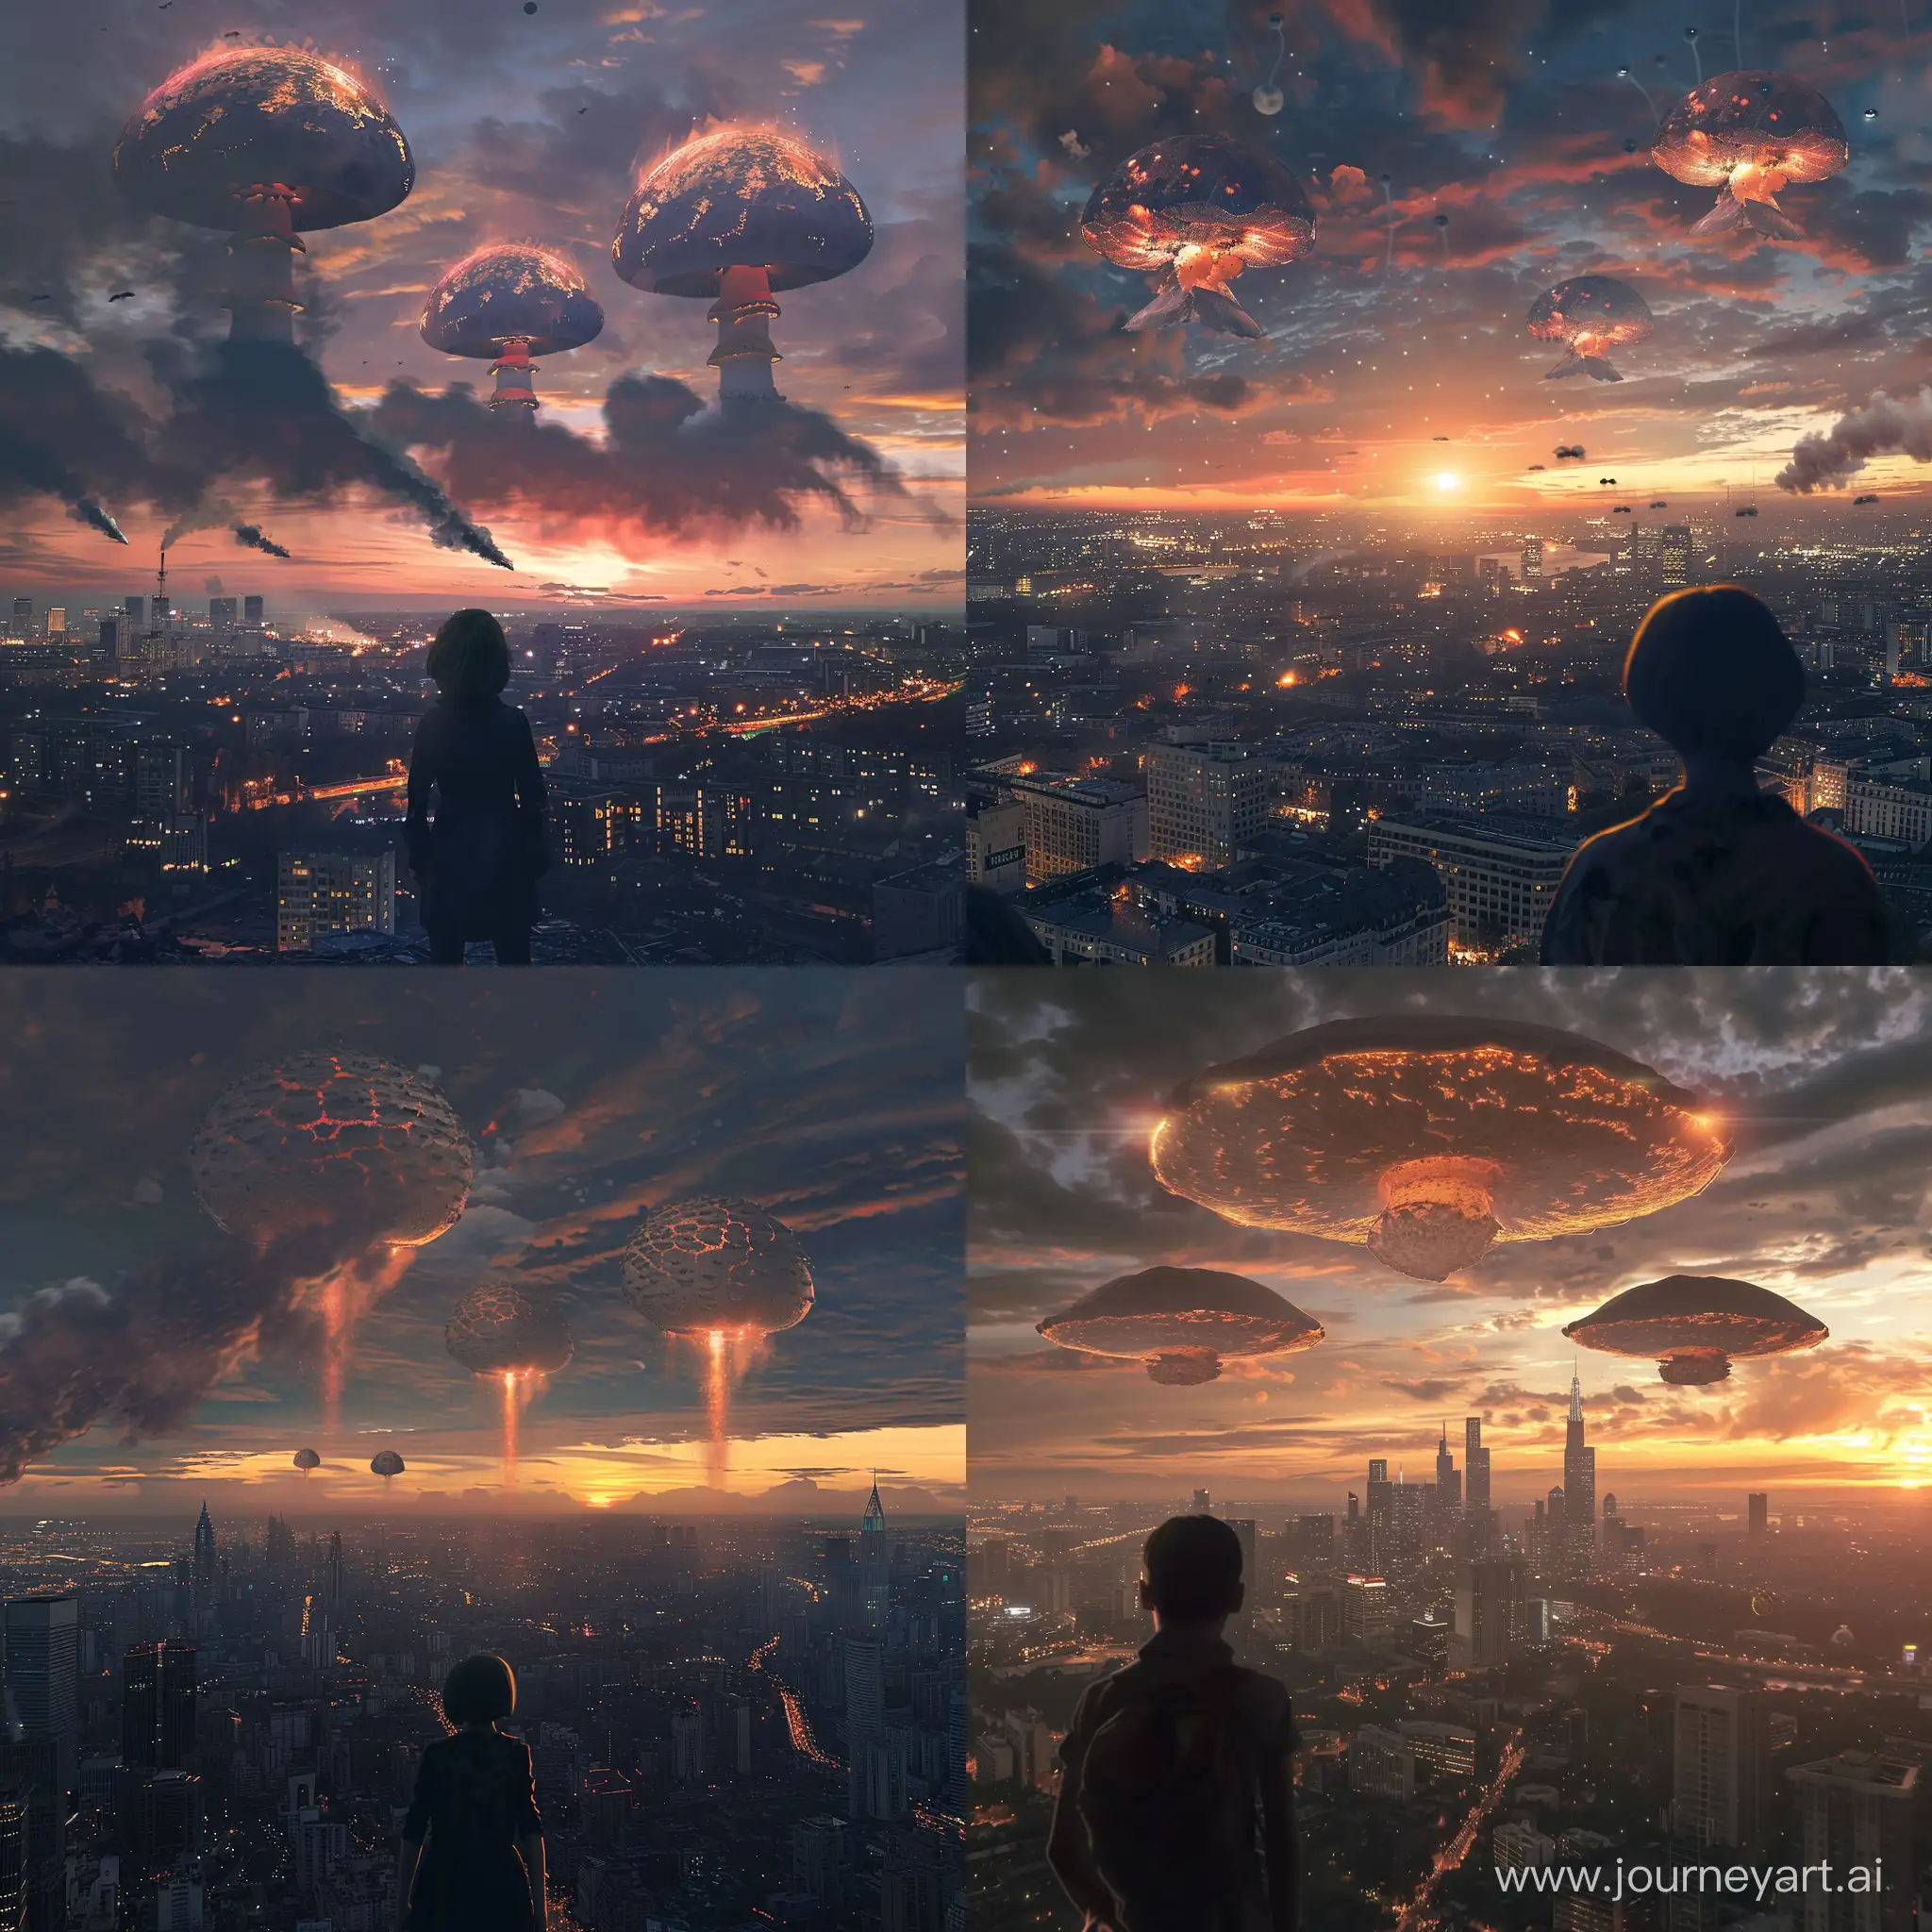 AweStruck-Individual-Observing-Three-Nuclear-Mushrooms-Over-Urban-Landscape-at-Dusk